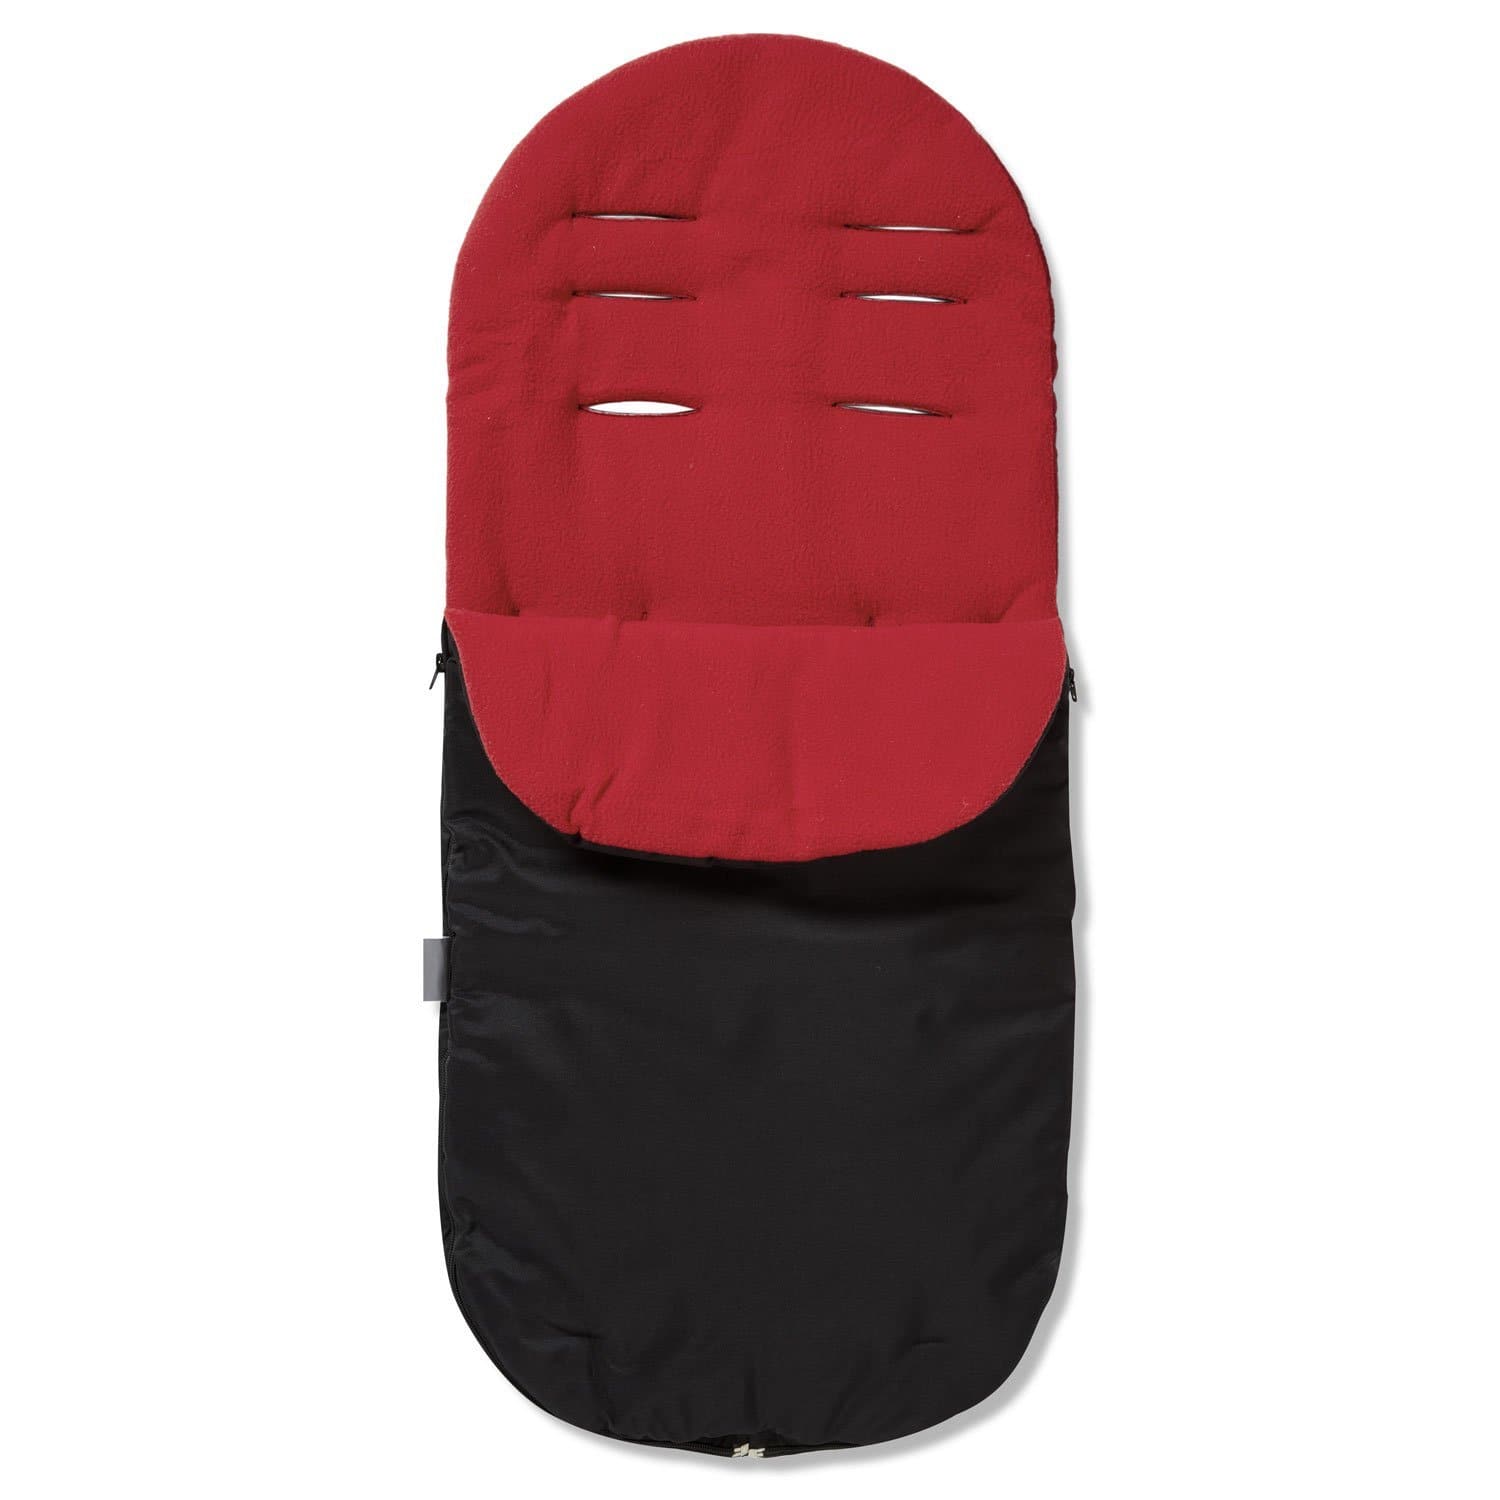 Footmuff / Cosy Toes Compatible with Babywelt - Red / Fits All Models | For Your Little One